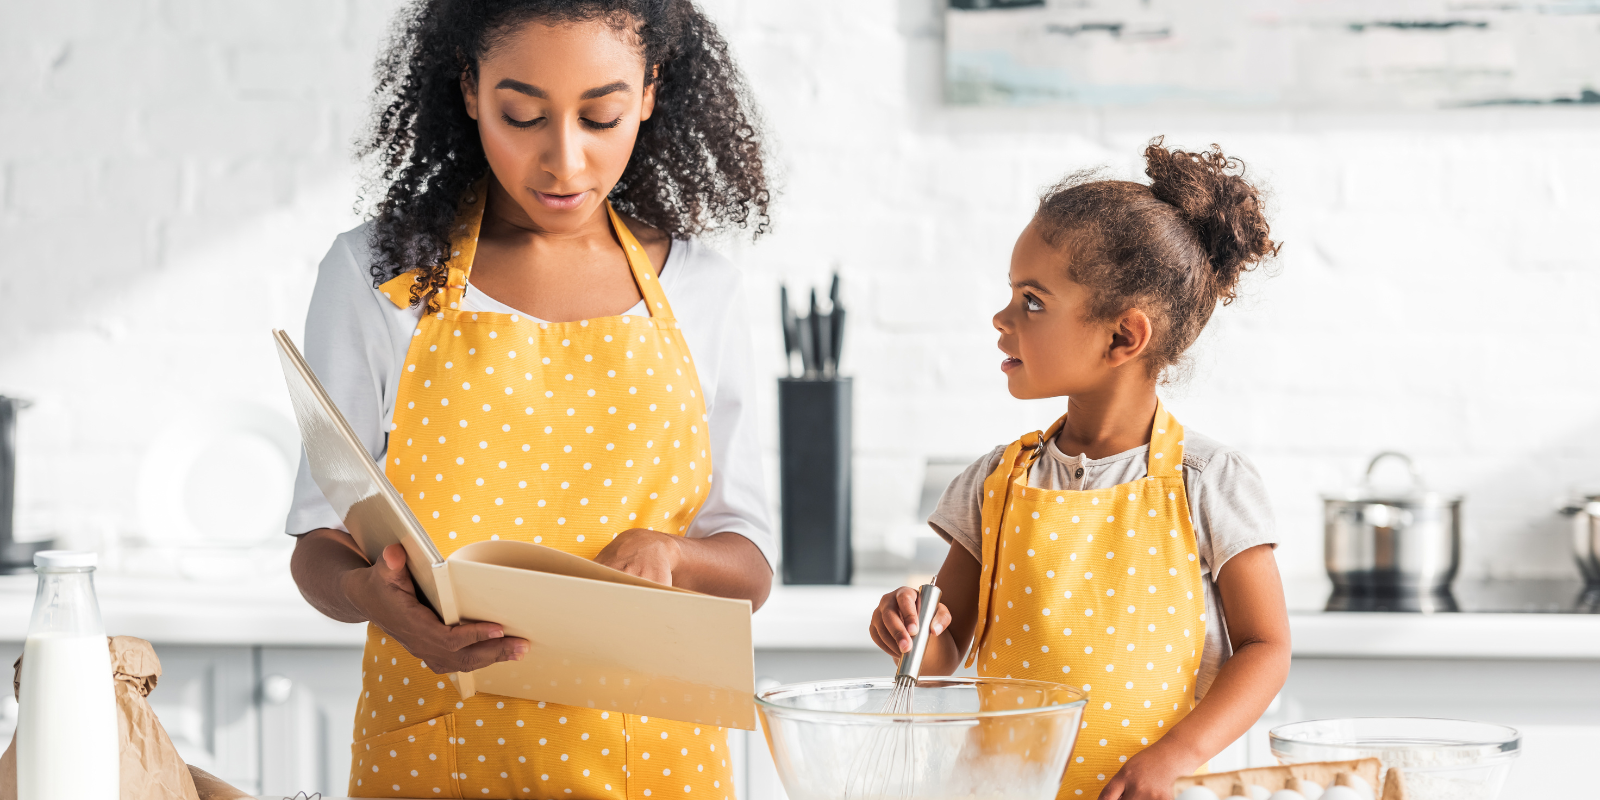 Two Black sisters wearing white tshirts and yellow polka dotted aprons bake gluten free treats in a modern white kitchen, with the addorable toddler sister looking up adoringly at her big sister who is reading from a cookbook.